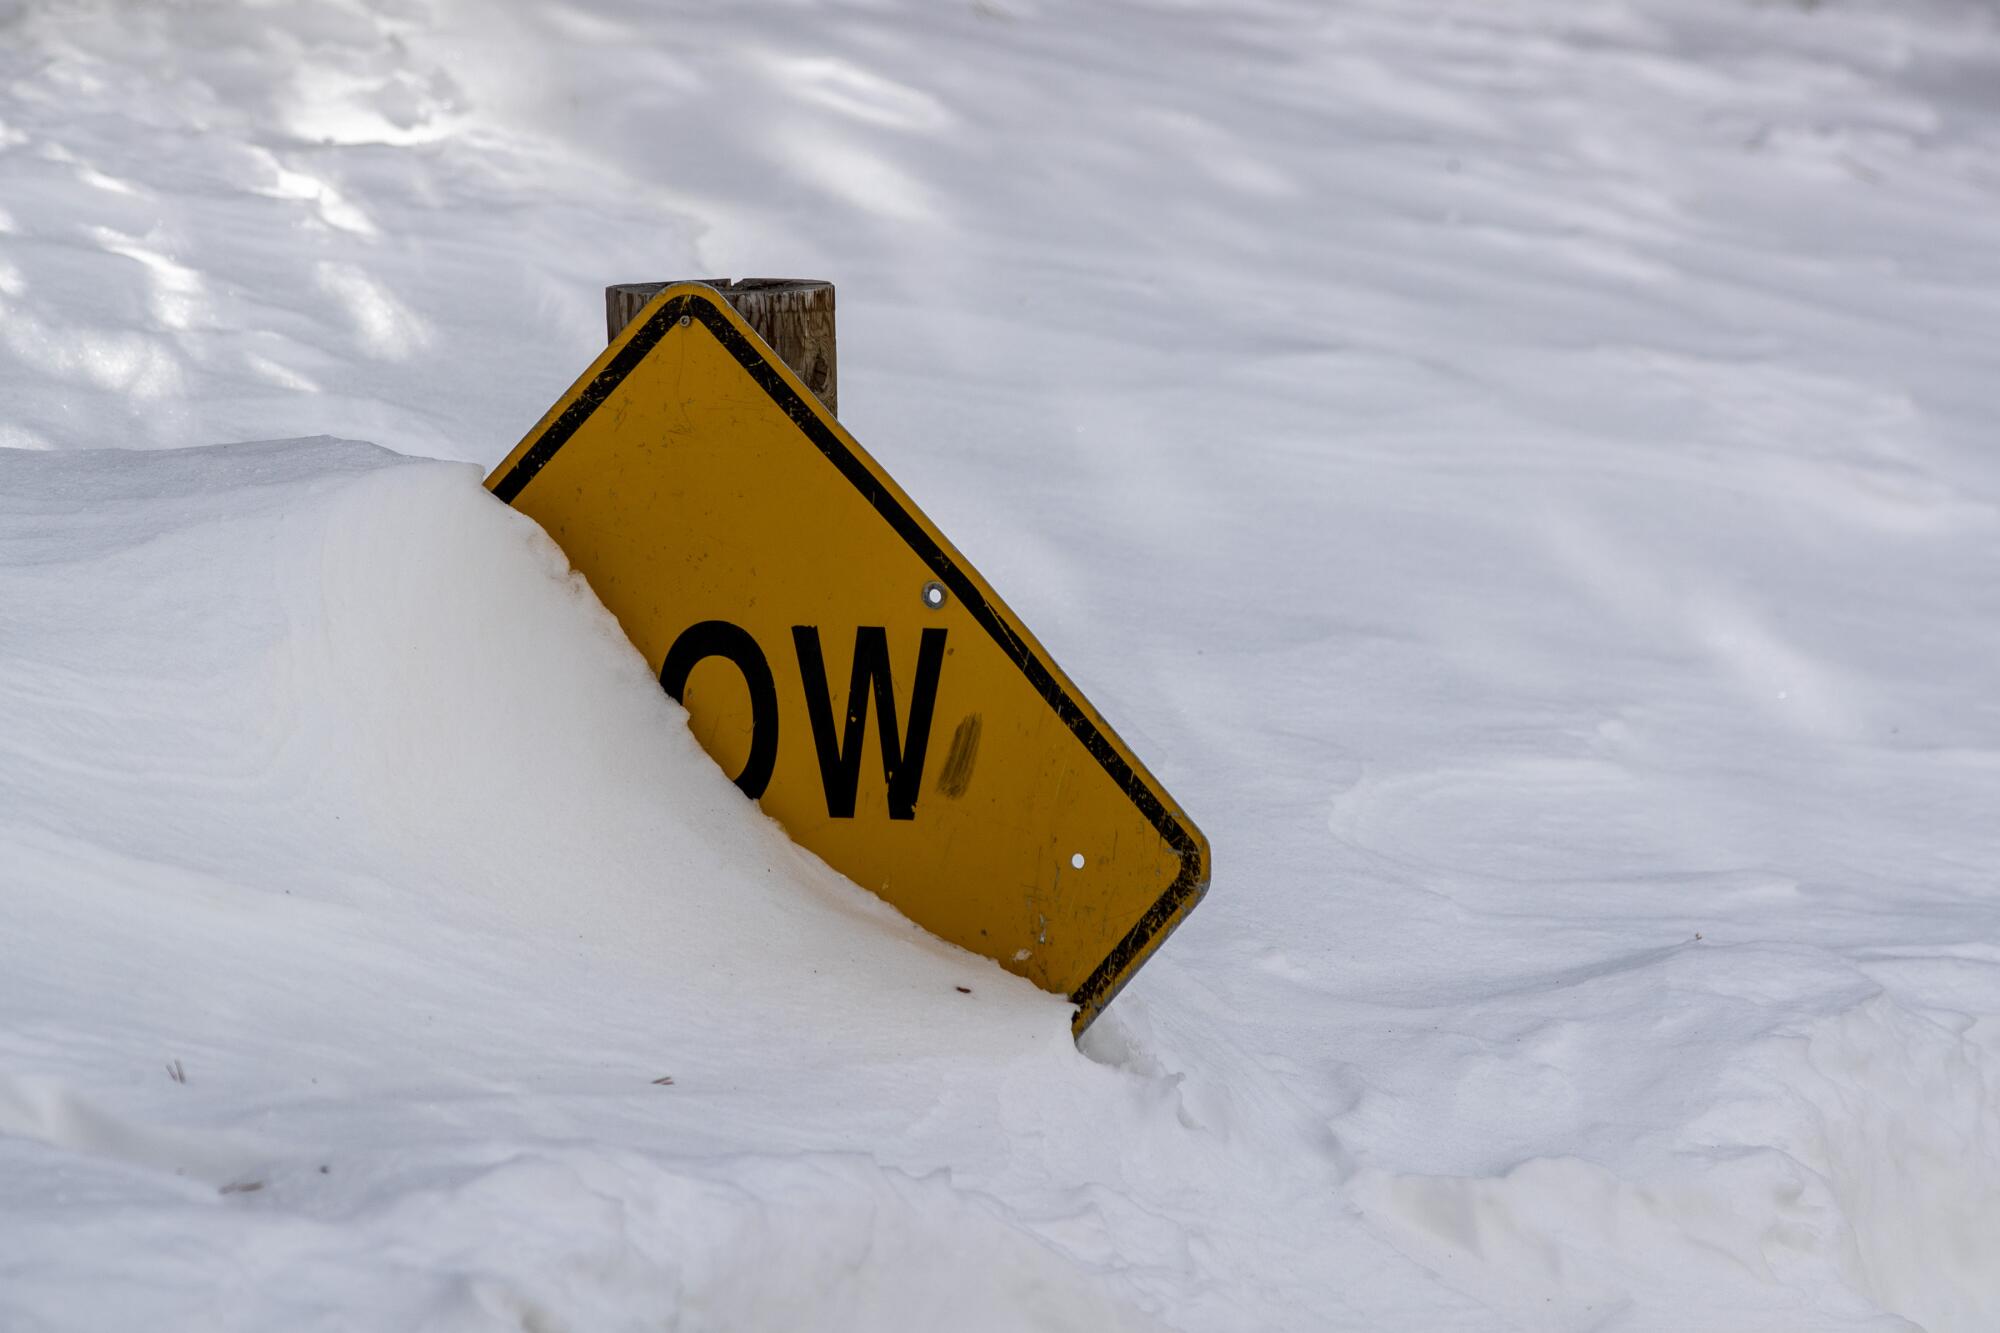 A "Slow" road sign buried in snow